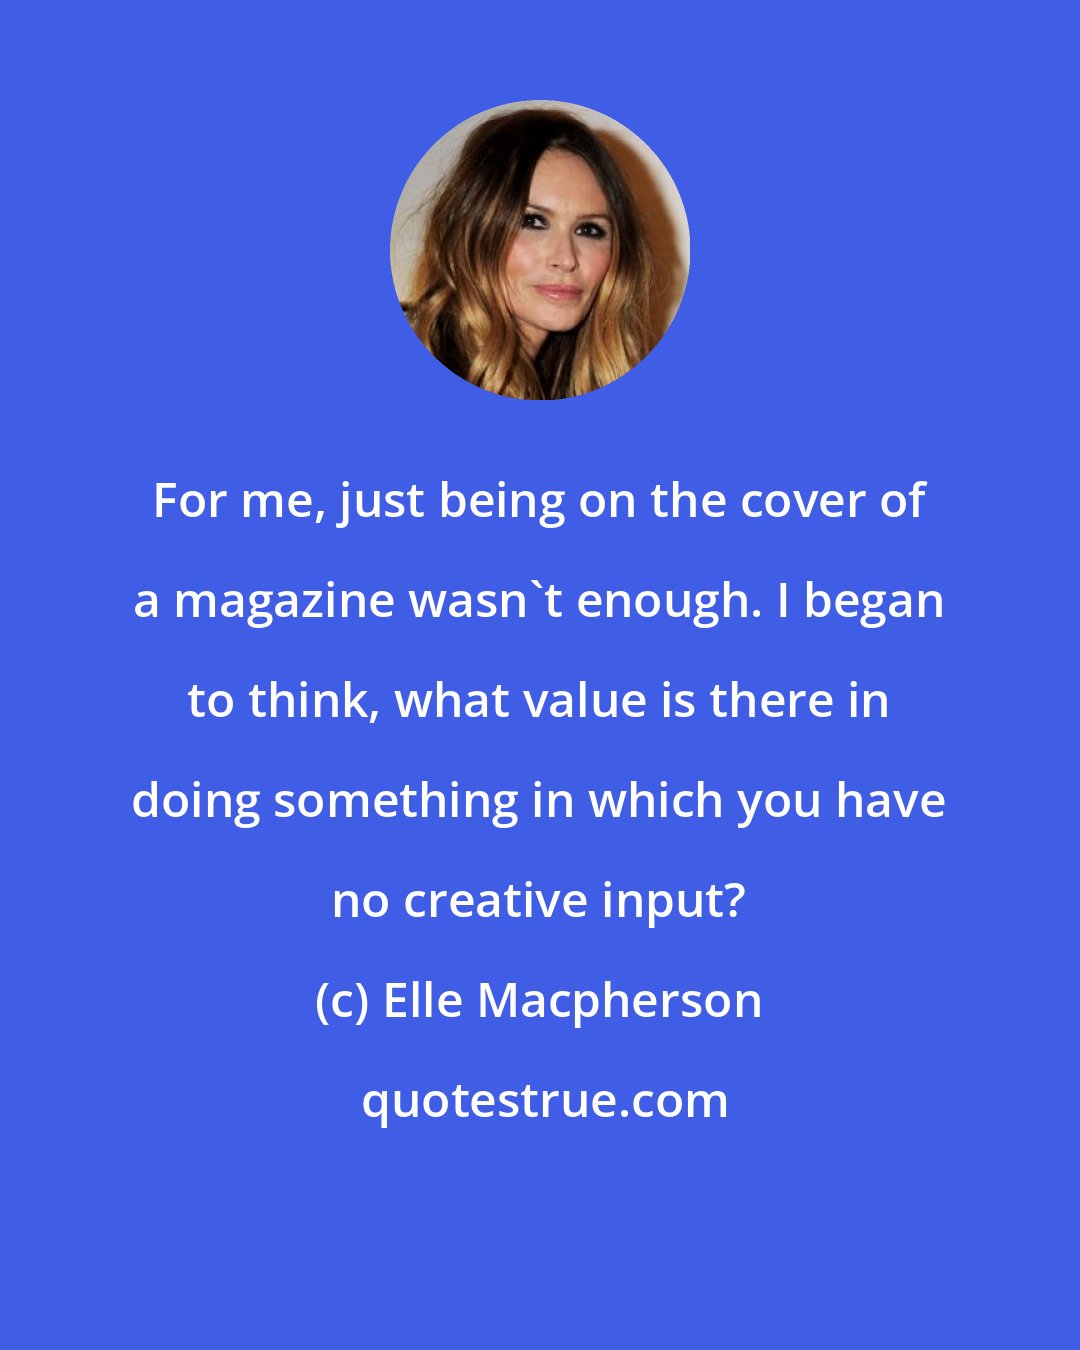 Elle Macpherson: For me, just being on the cover of a magazine wasn't enough. I began to think, what value is there in doing something in which you have no creative input?